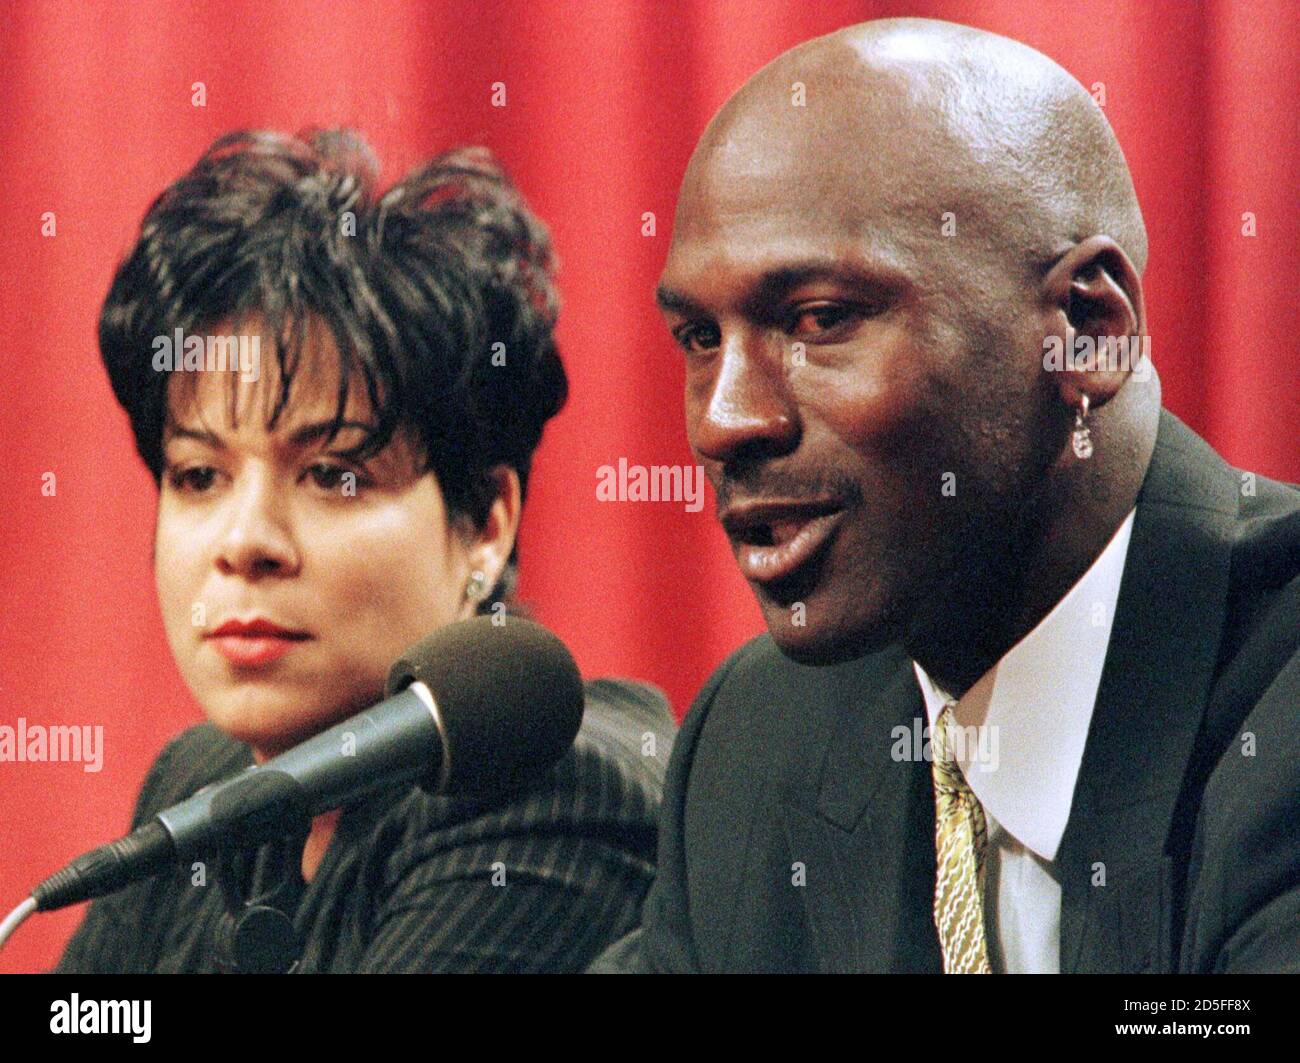 With his wife Juanita at his side, Chicago Bulls' star Michael Jordan, who  led the Bulls to six NBA championships, speaks at a news conference in  Chicago, January 13. Jordan announced that